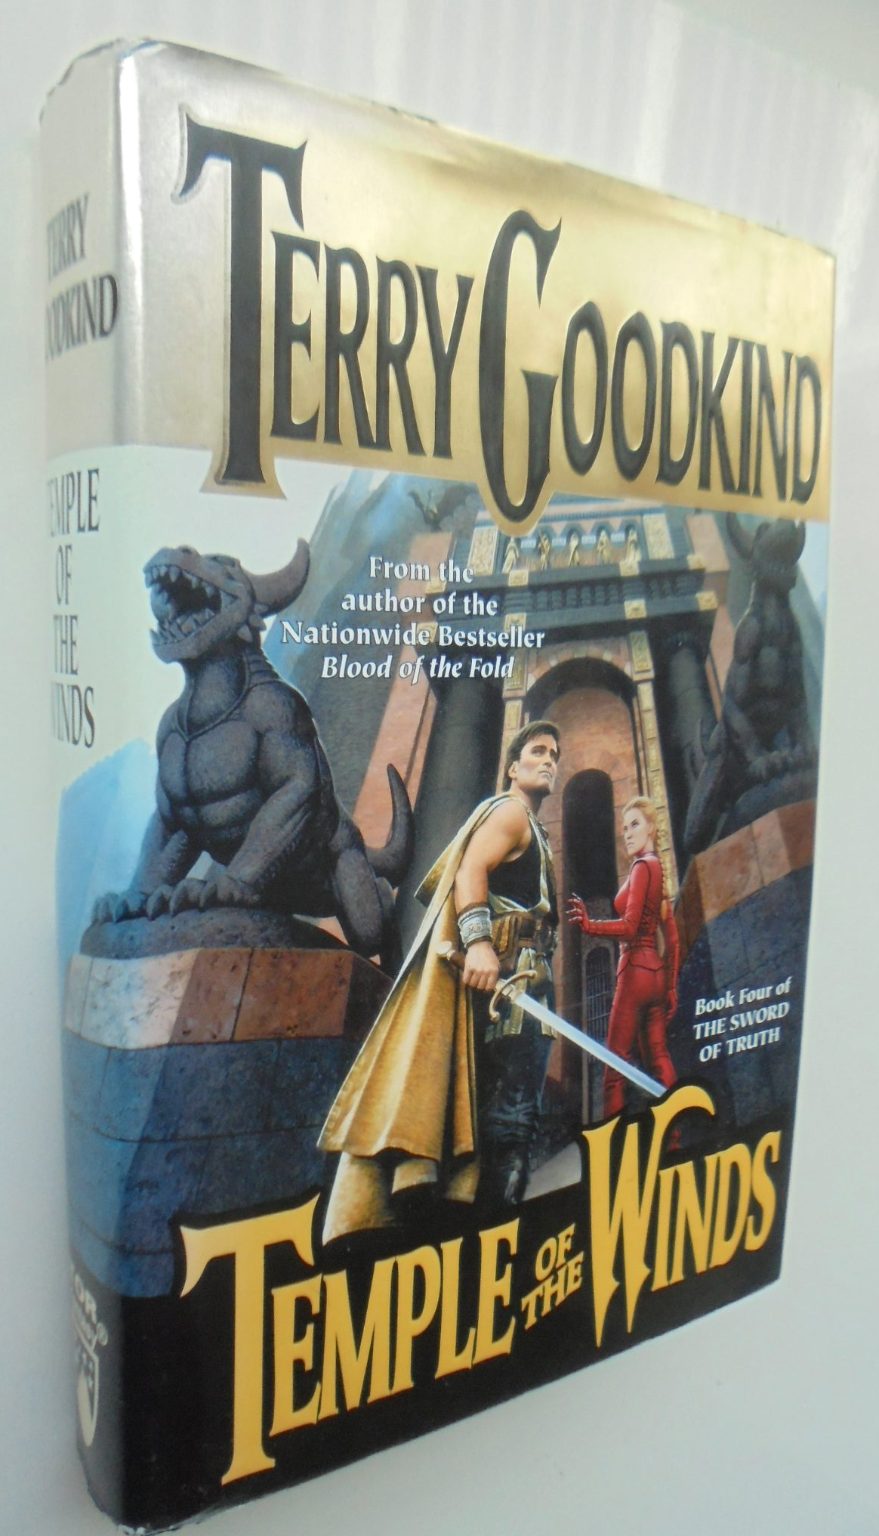 Temple of the Winds (Sword­ of Truth book 4) By Terry Goodkind. First Edition First Printing, 1997.